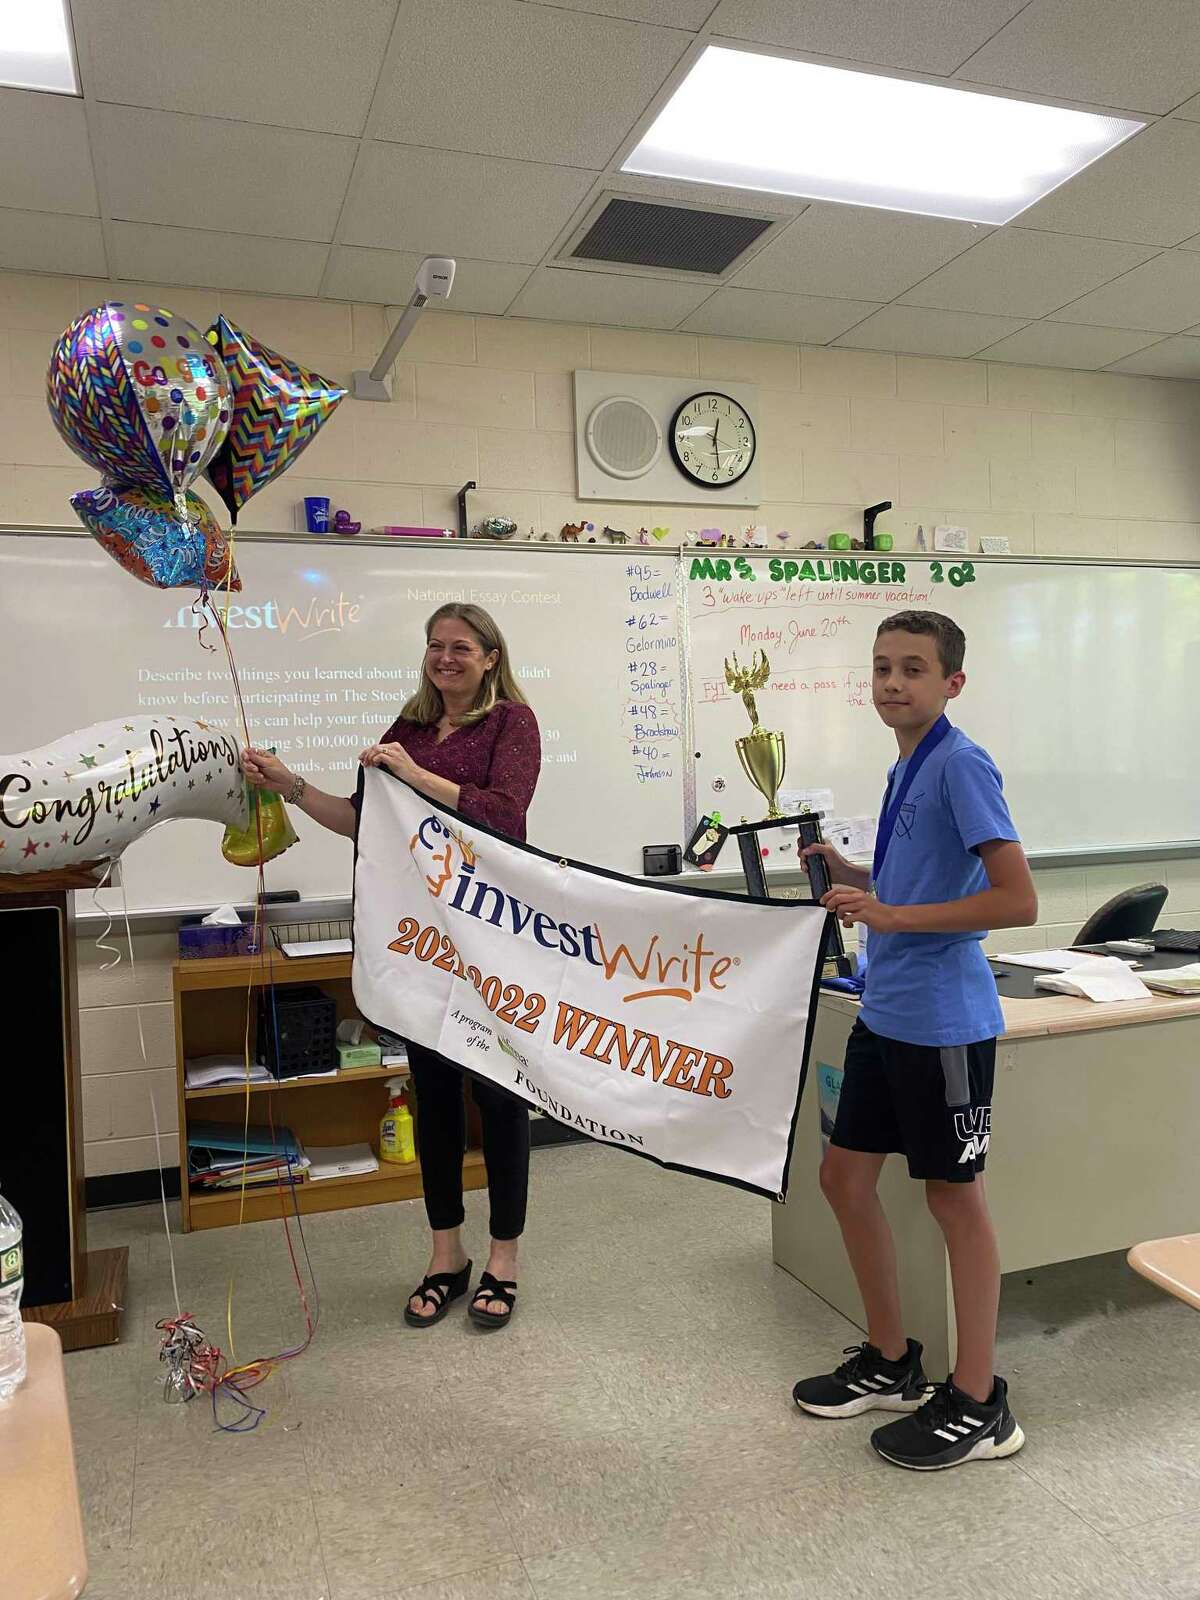 Torrington Middle School student Gabriel Mazzacane and his teacher, Suzanne Spalinger were honored by the SIFMA Foundation during a classroom presentation on June 20.